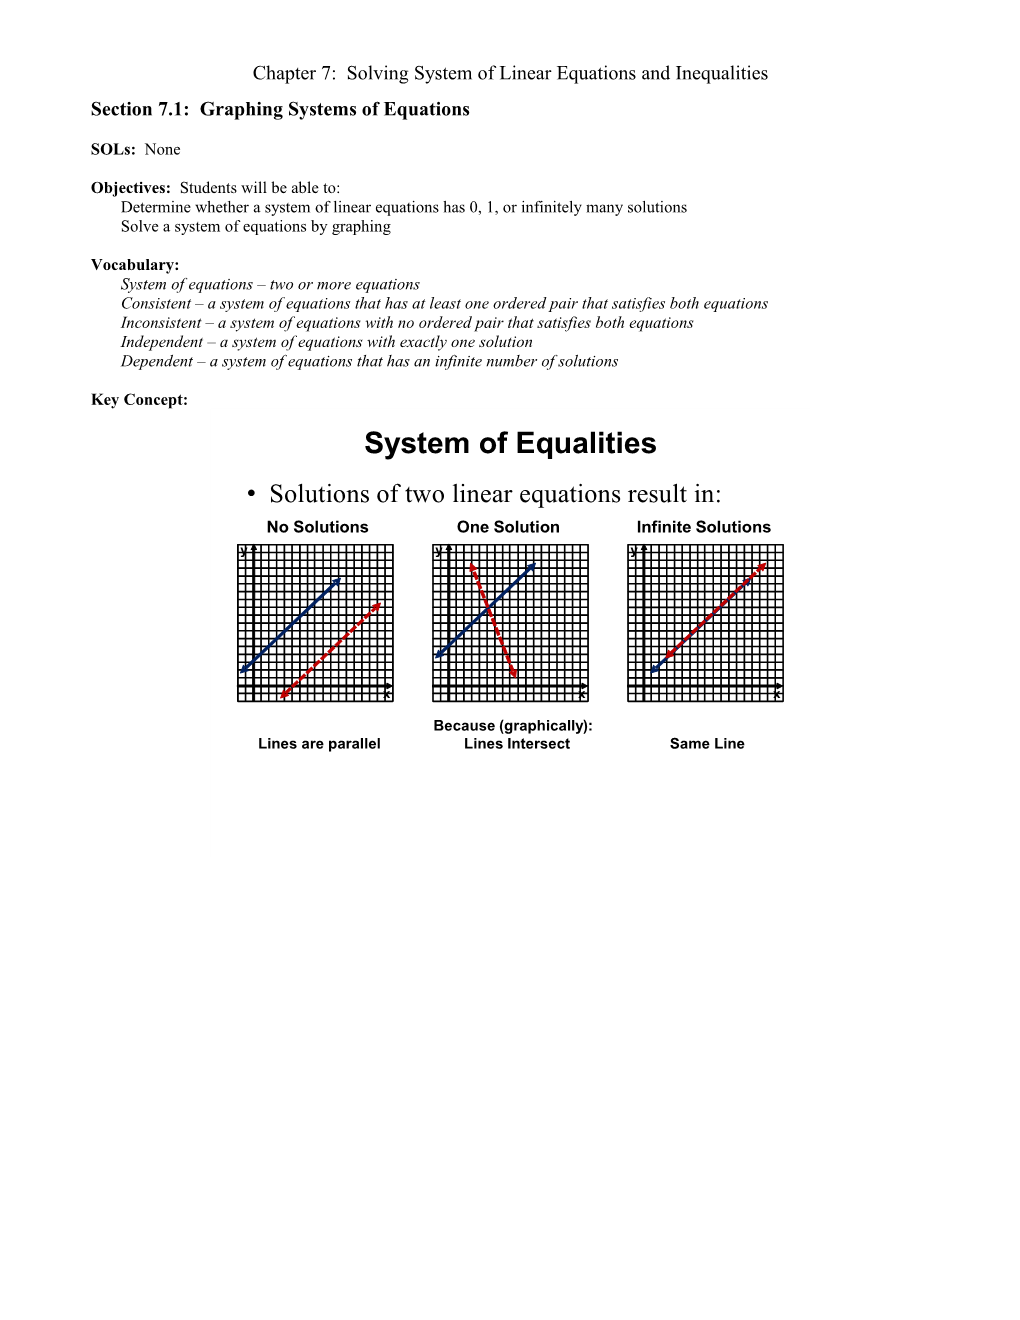 Section 7.1: Graphing Systems of Equations